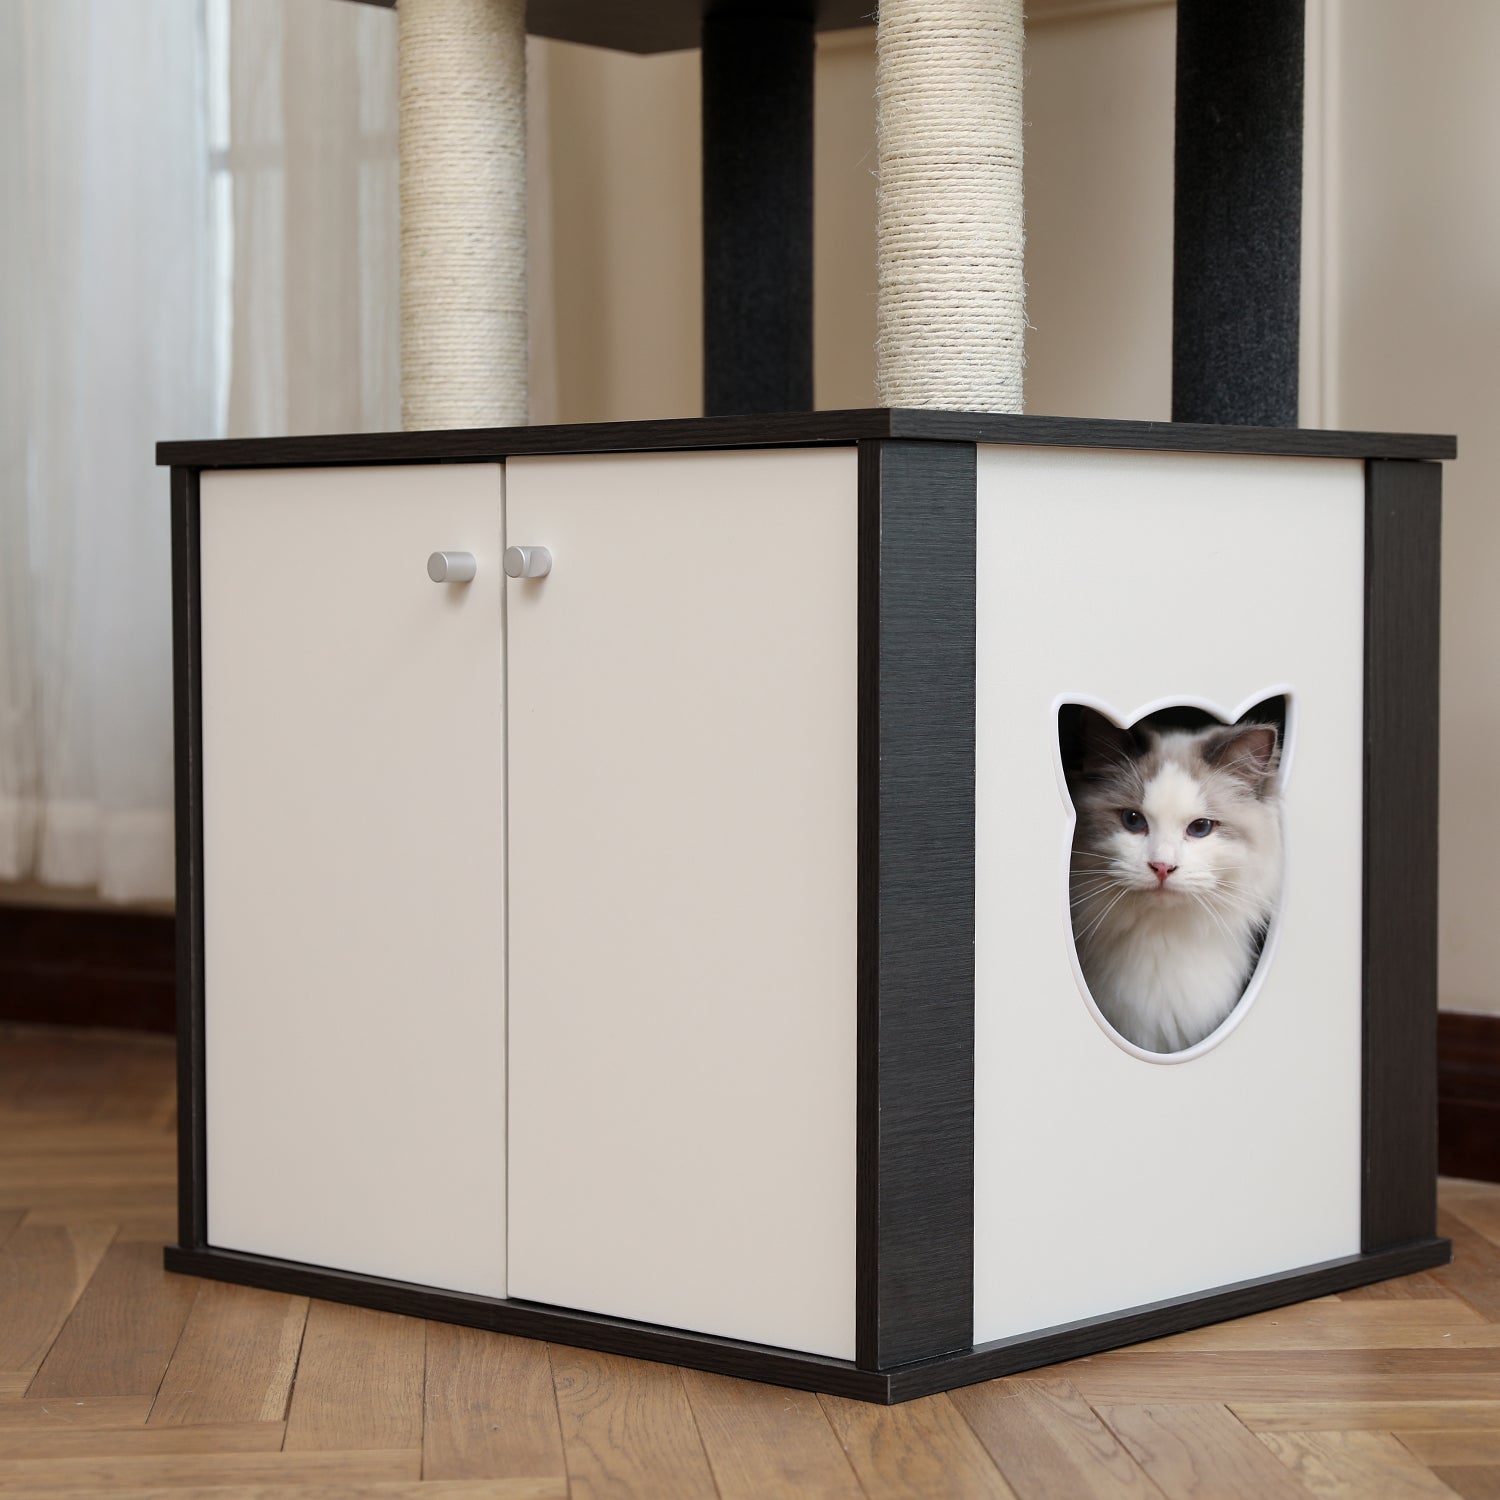 Modern Black All-in-One Cat Tree Tower with Multi-Functional Cat Litter Box House, Cat Condo, Hammock, and Scratching Post for Cats